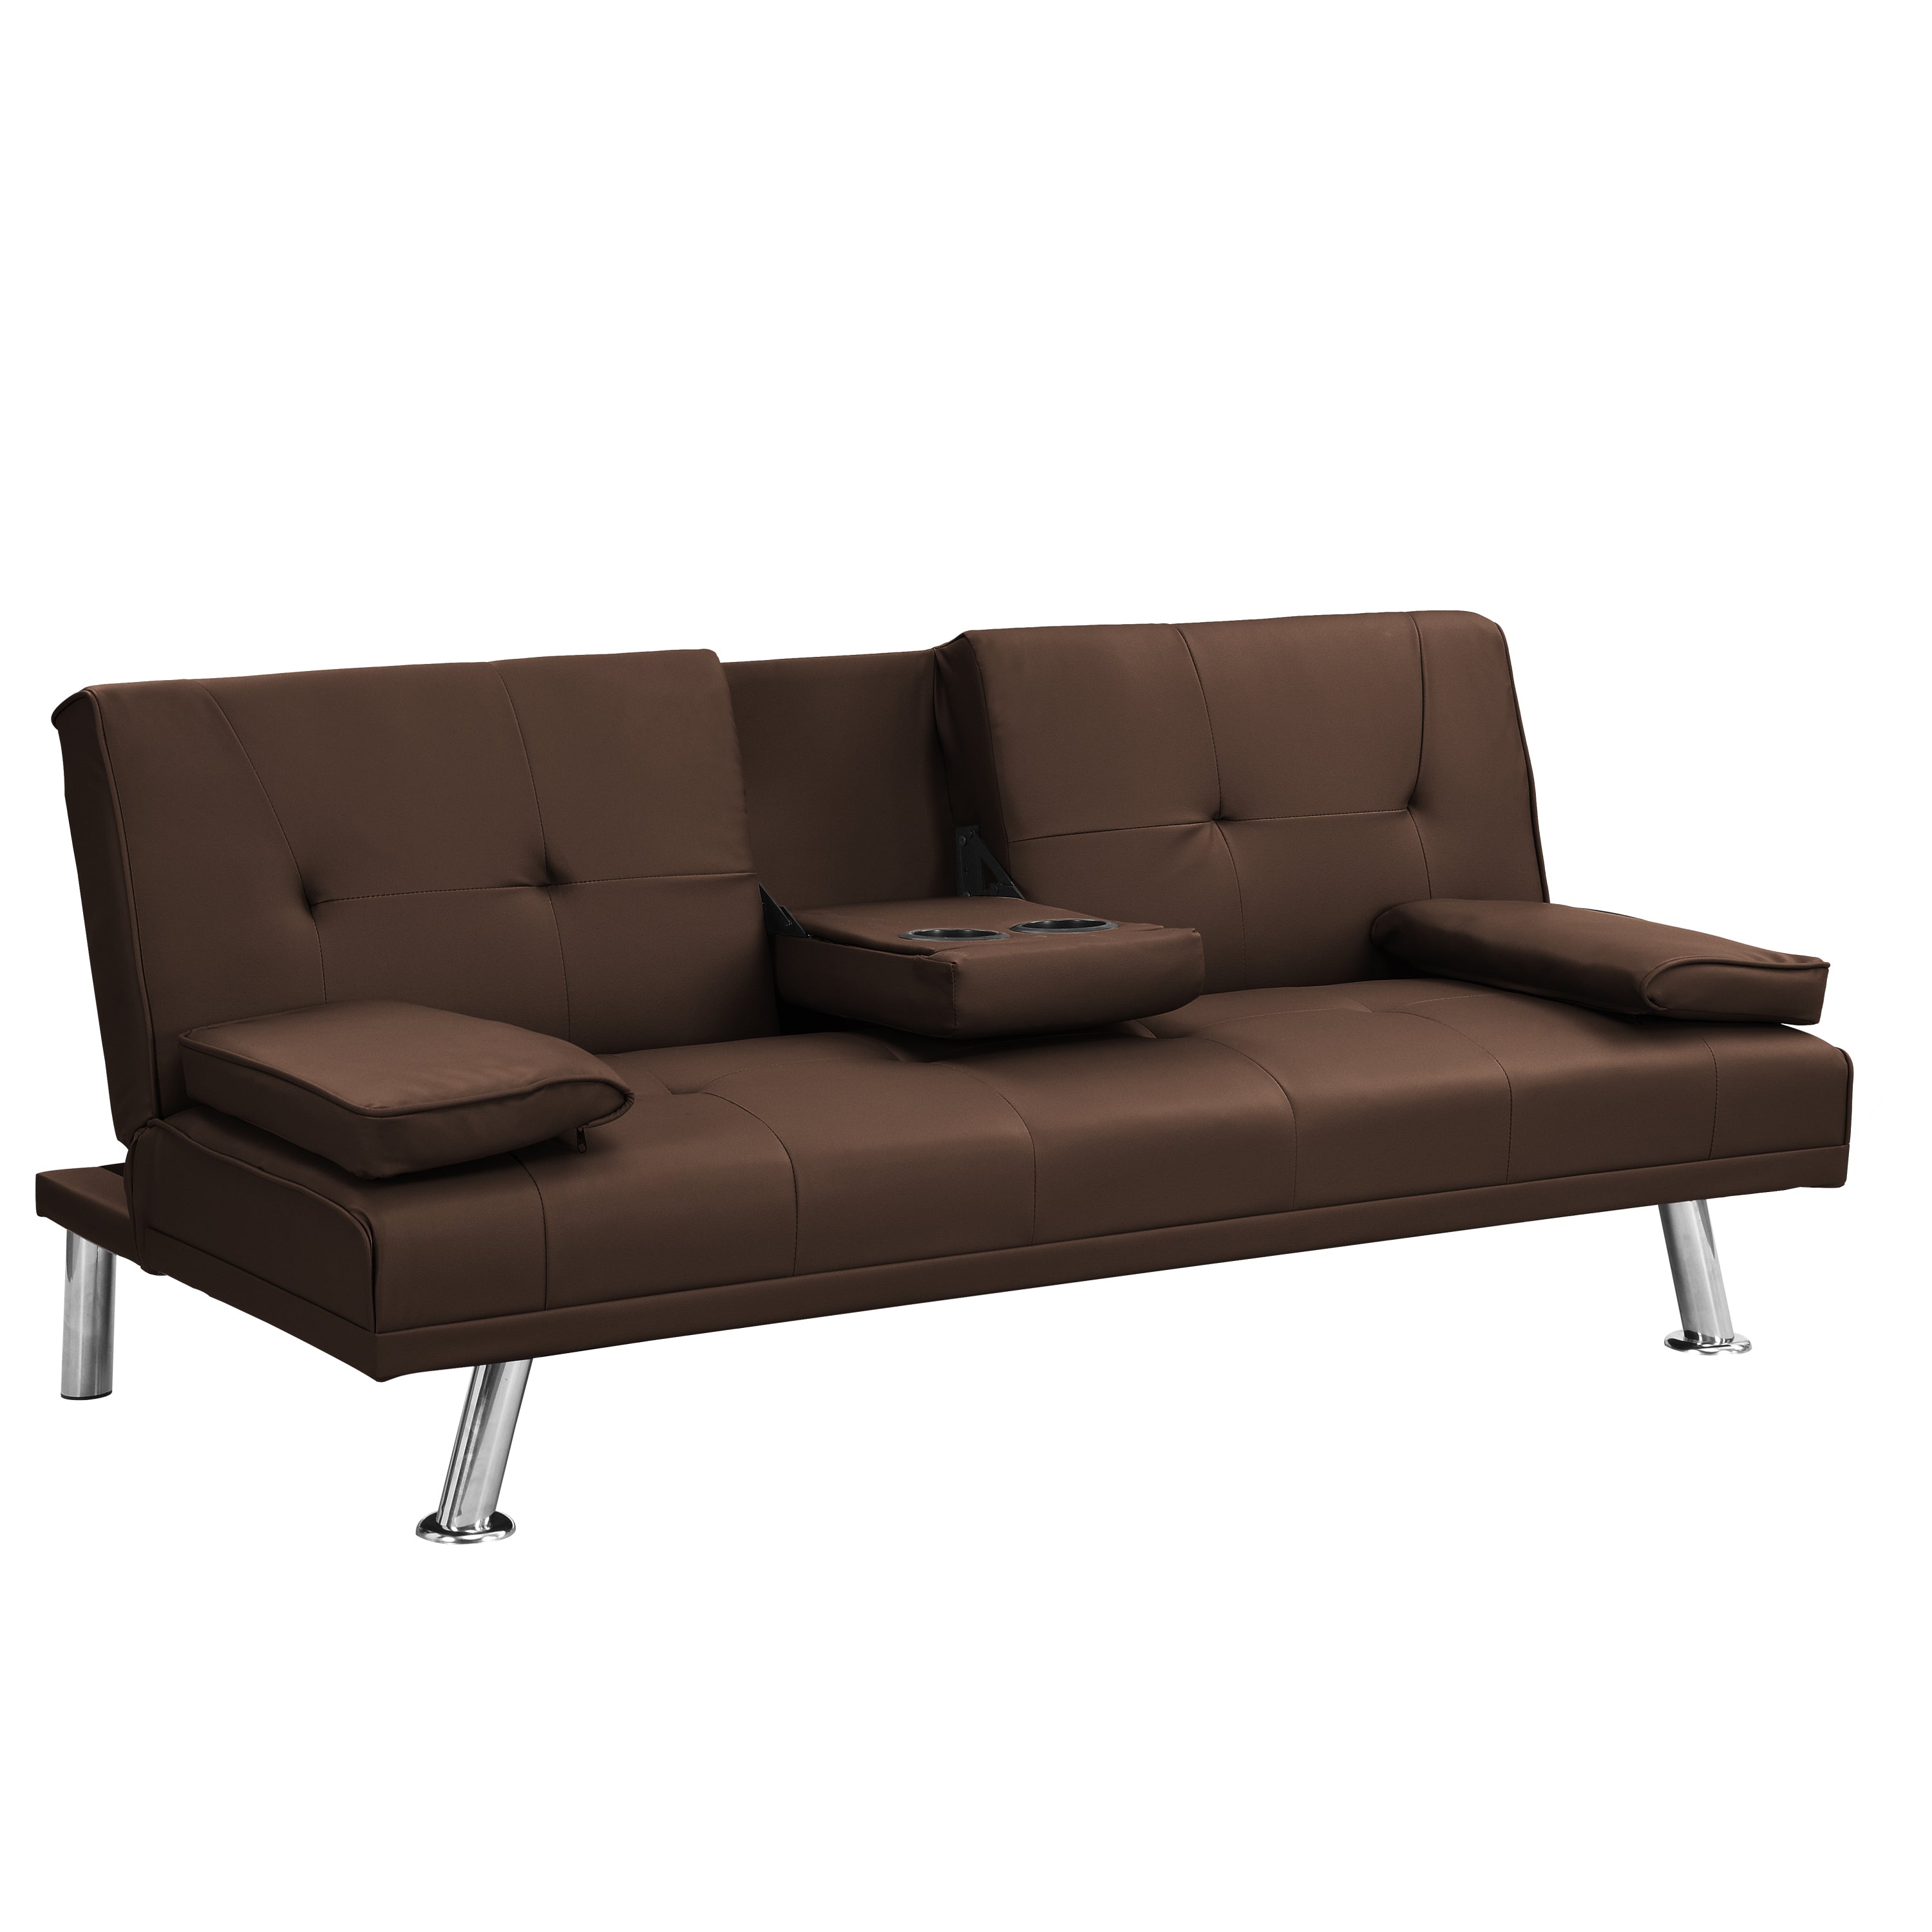 Sofa Bed with Armrest two holders  WOOD FRAME, STAINLESS LEG, FUTON BROWN  PVC